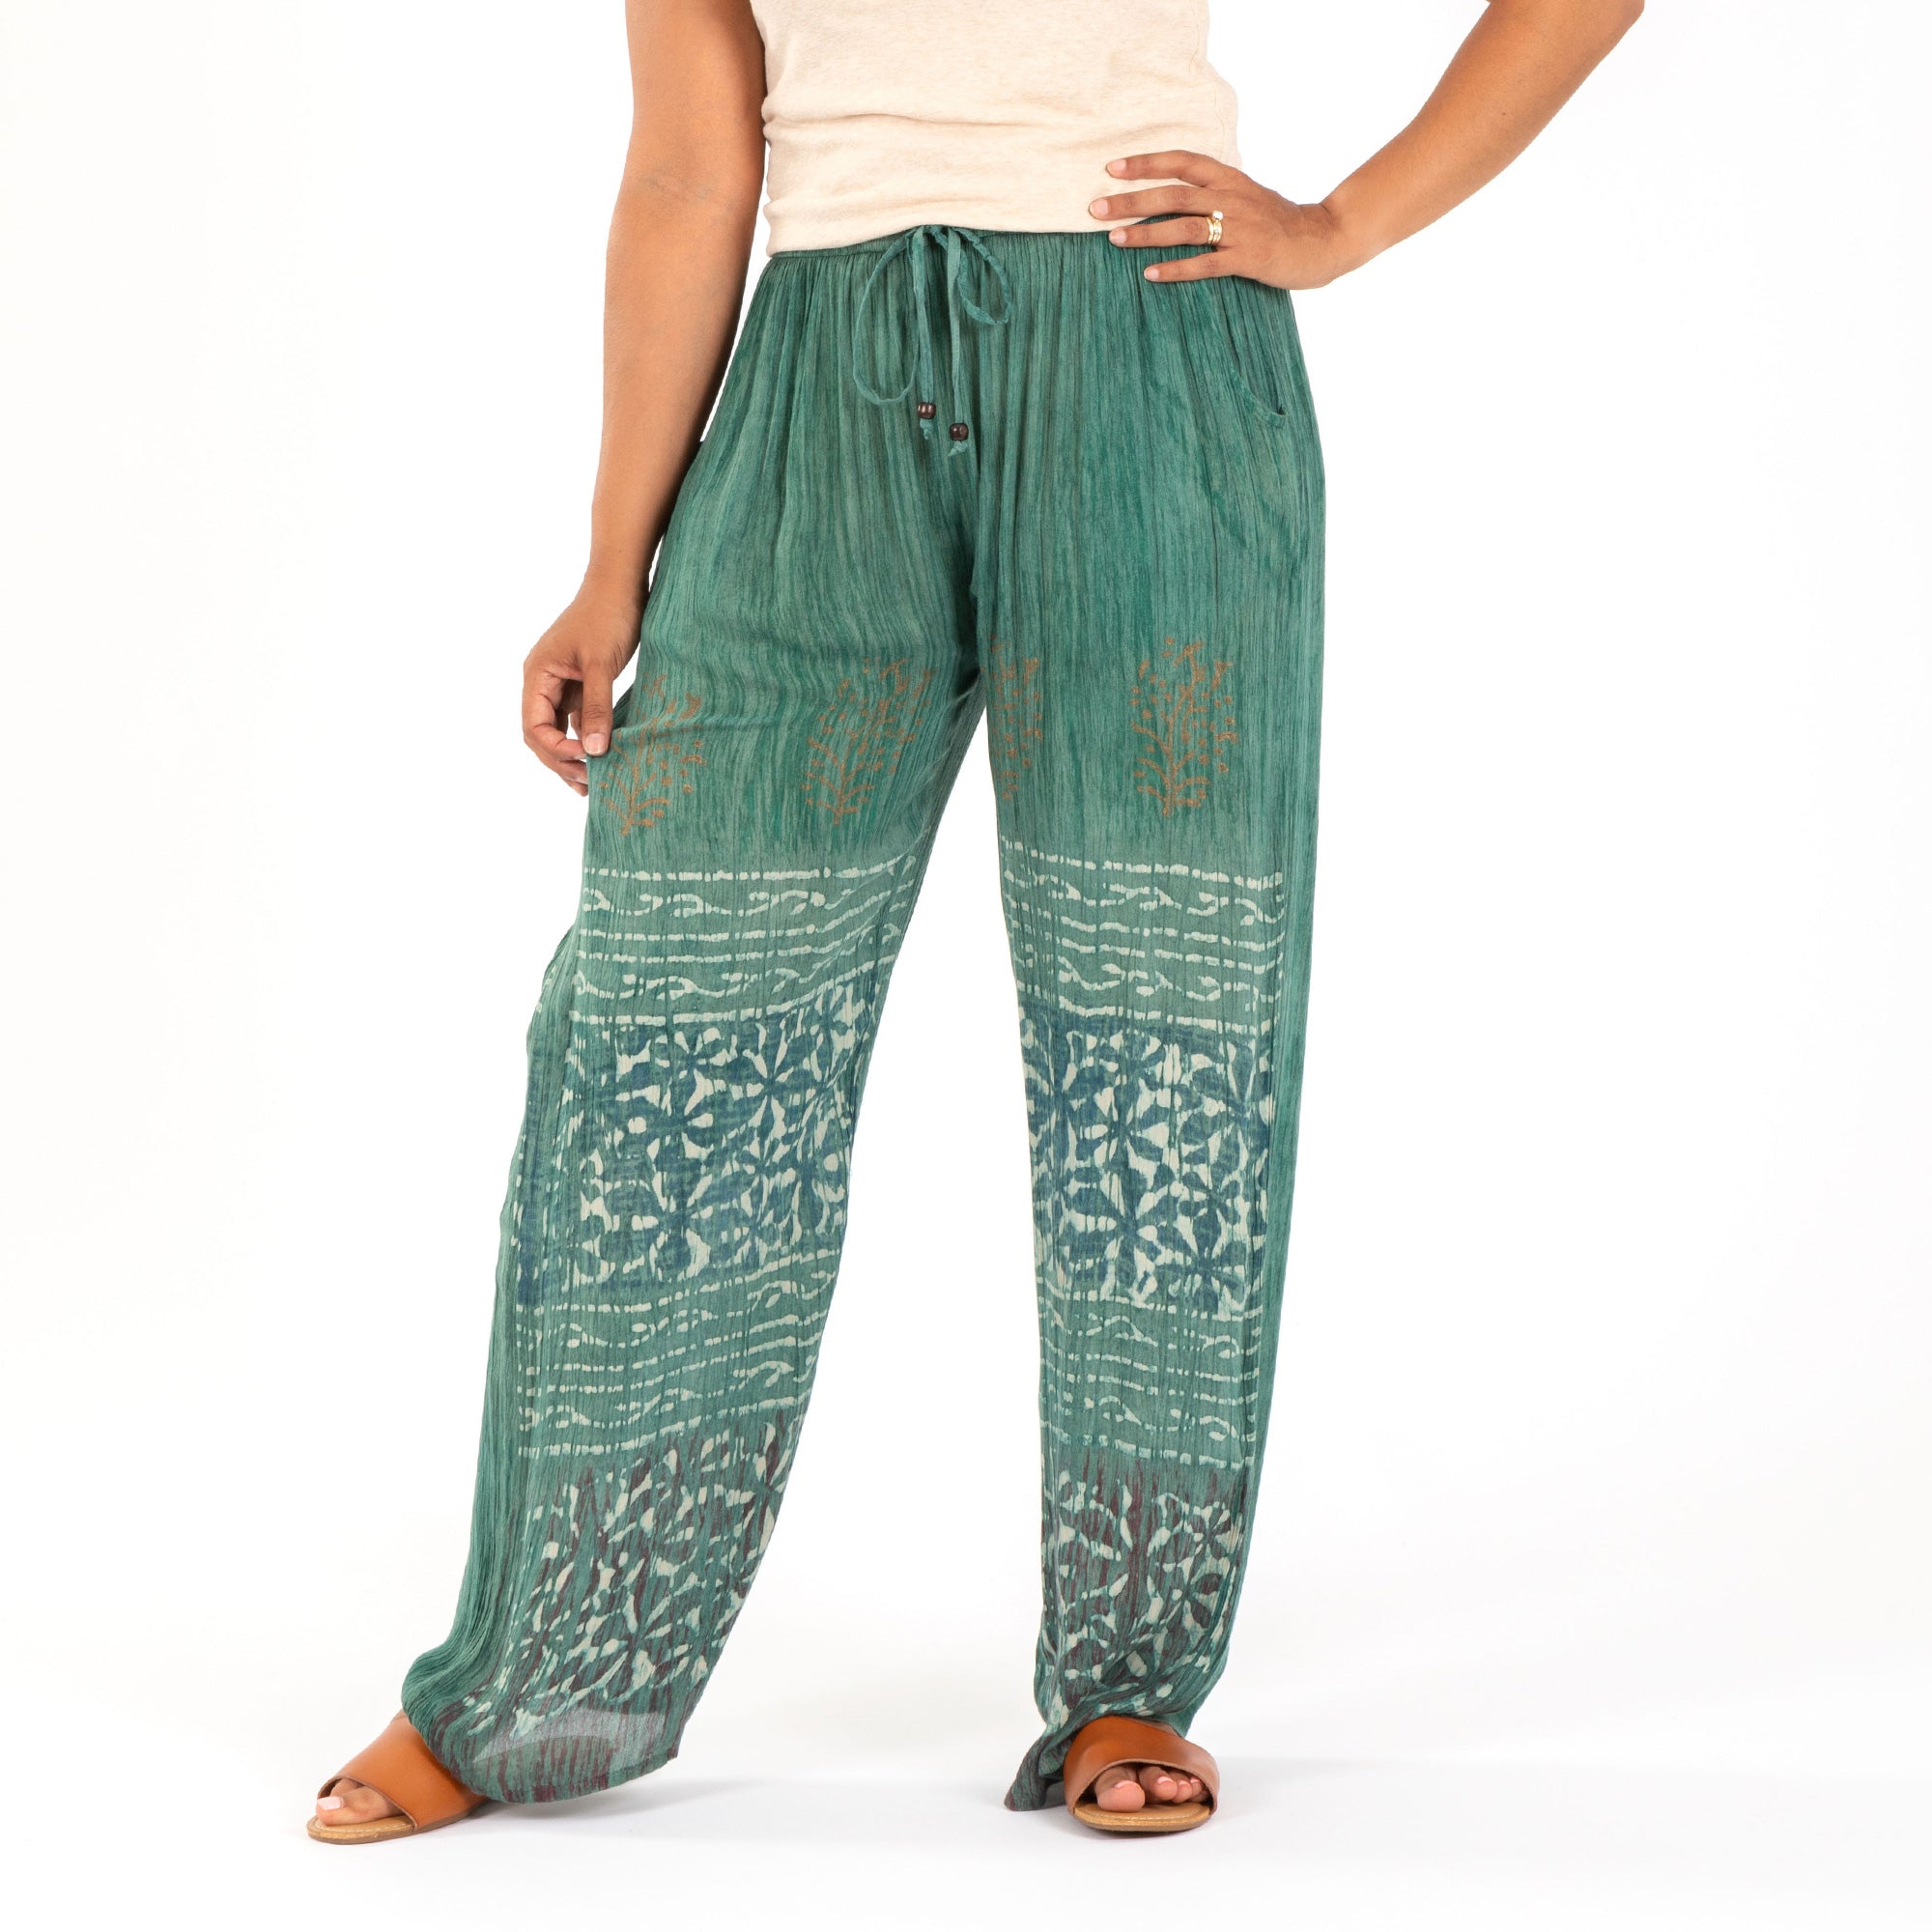 Women's Made To Move Casual Palazzo Pants & Top Set - Pants - Forest Green - 3X